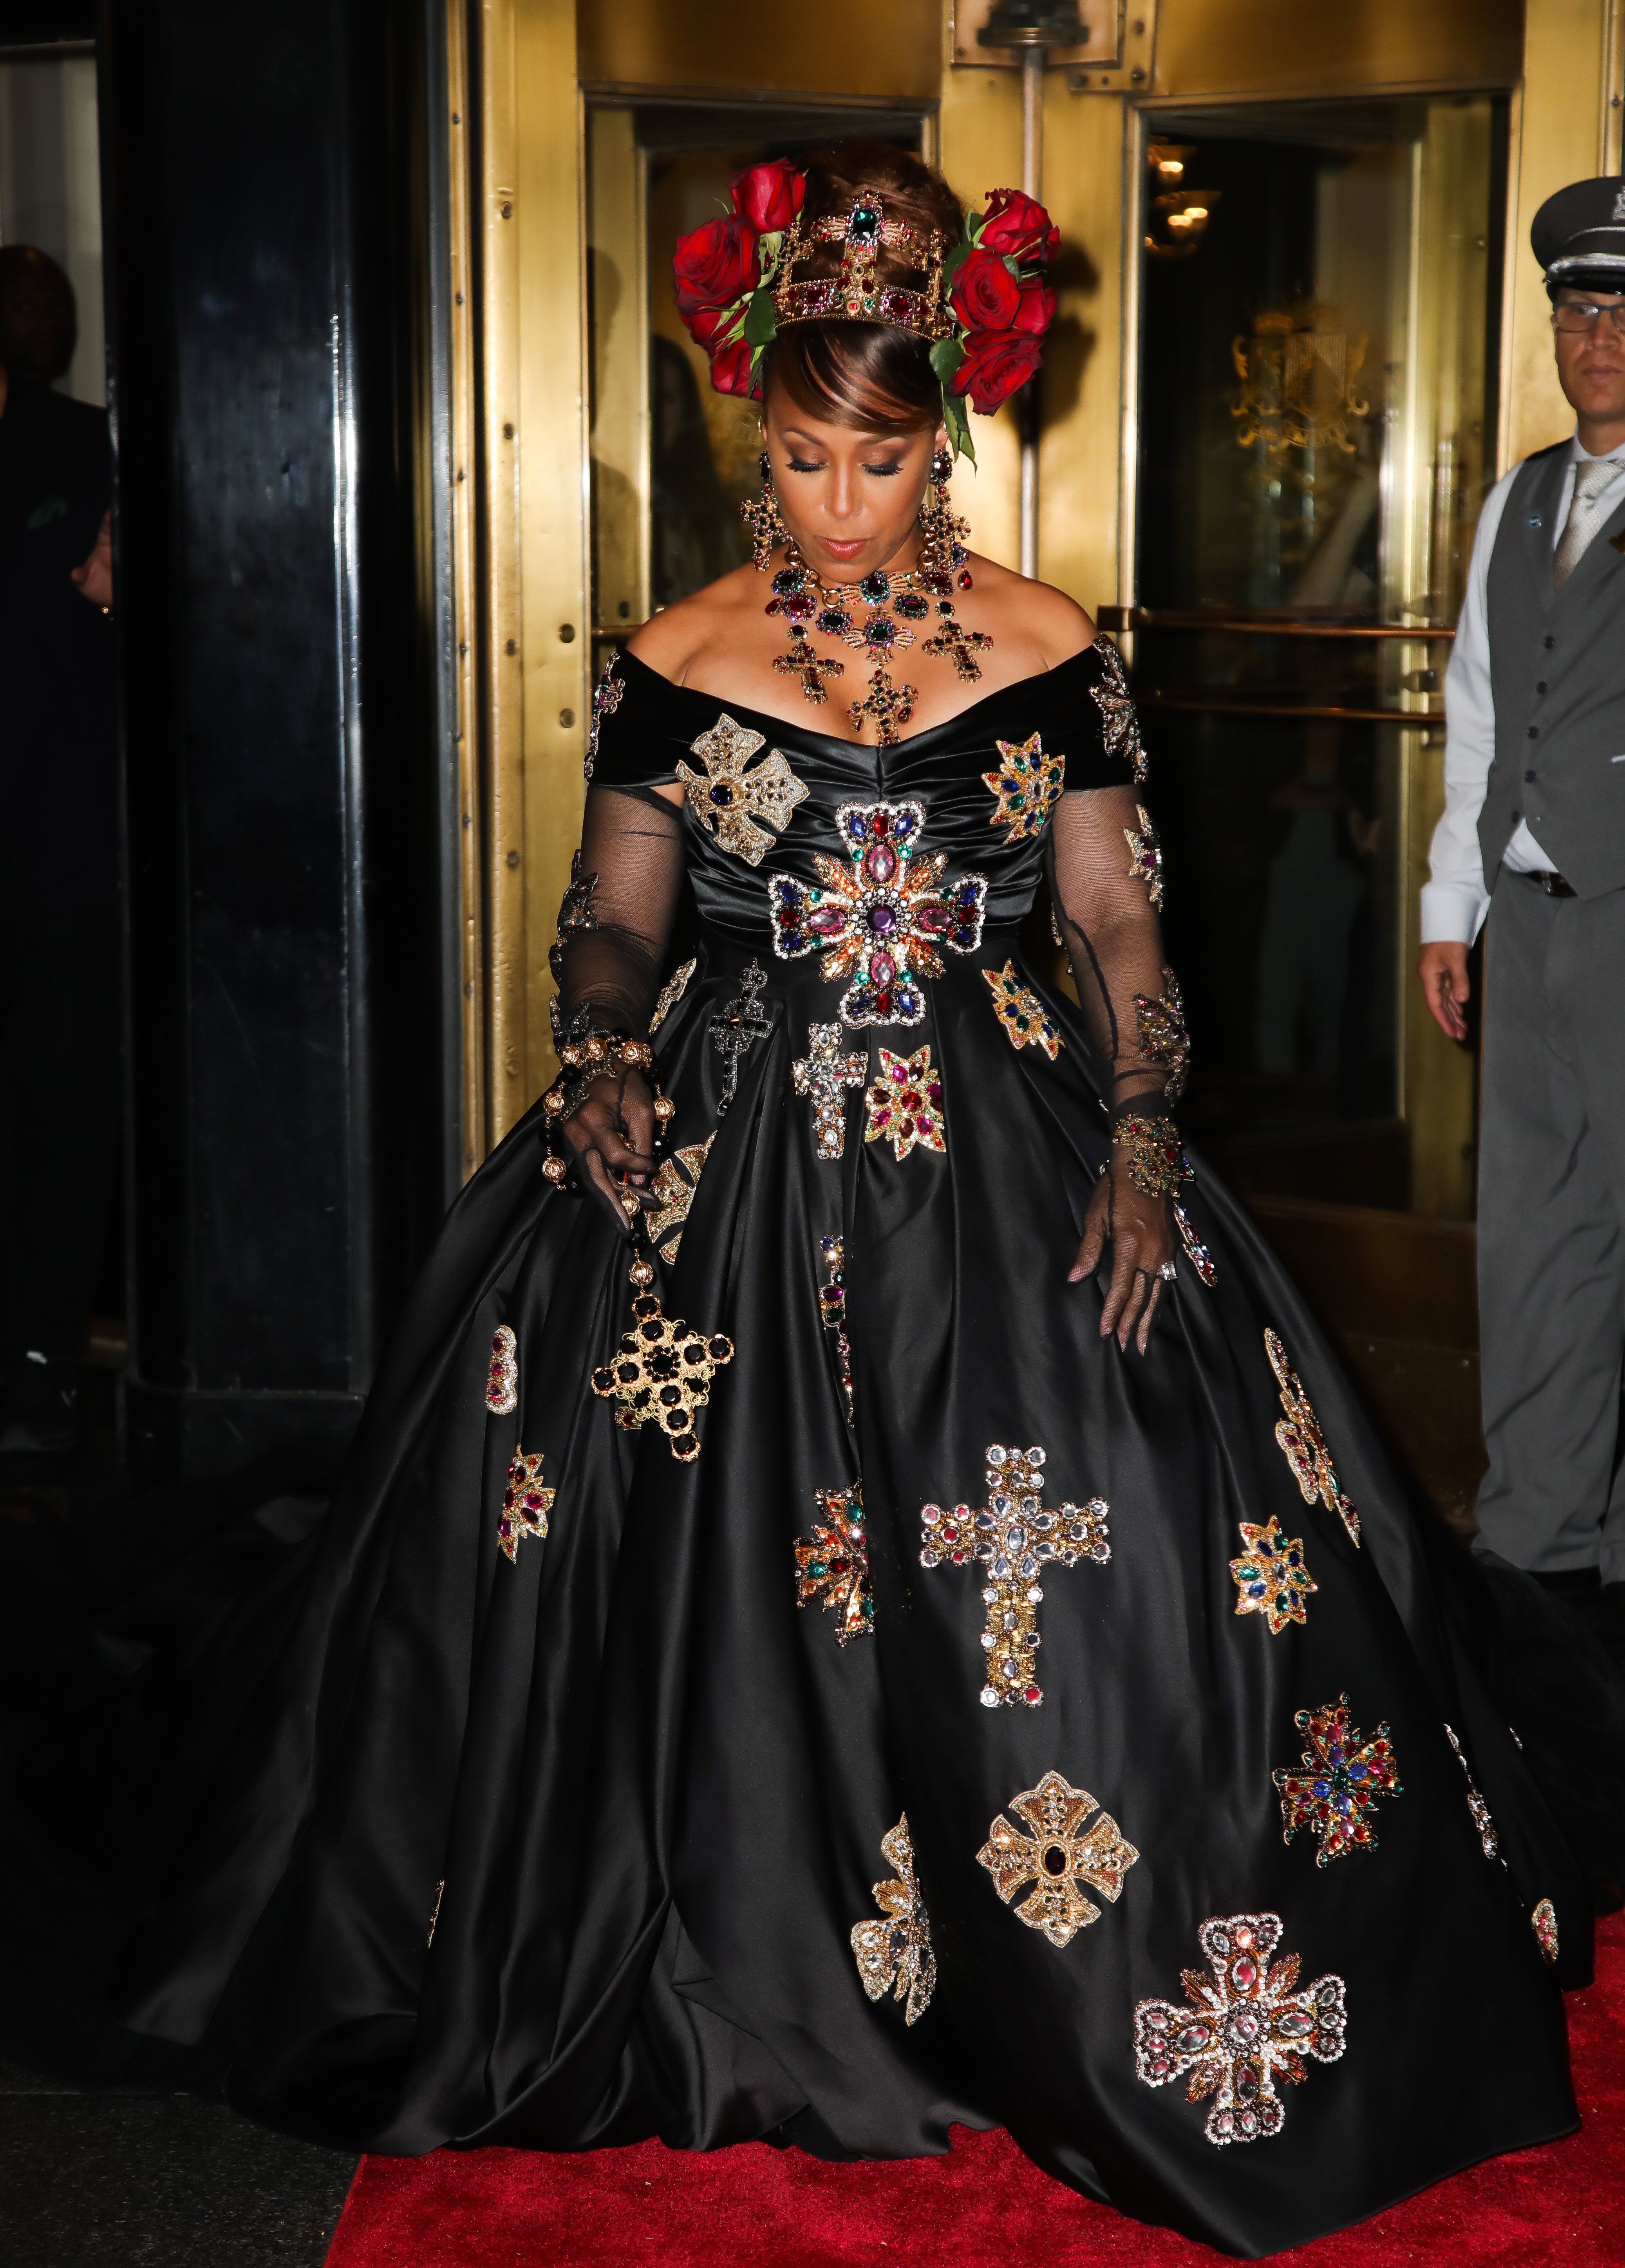 Marjorie Elaine Harvey pictured in New York City, wearing a black gown embroidered with diamond crosses with heavy jewelry | Source: Getty Images